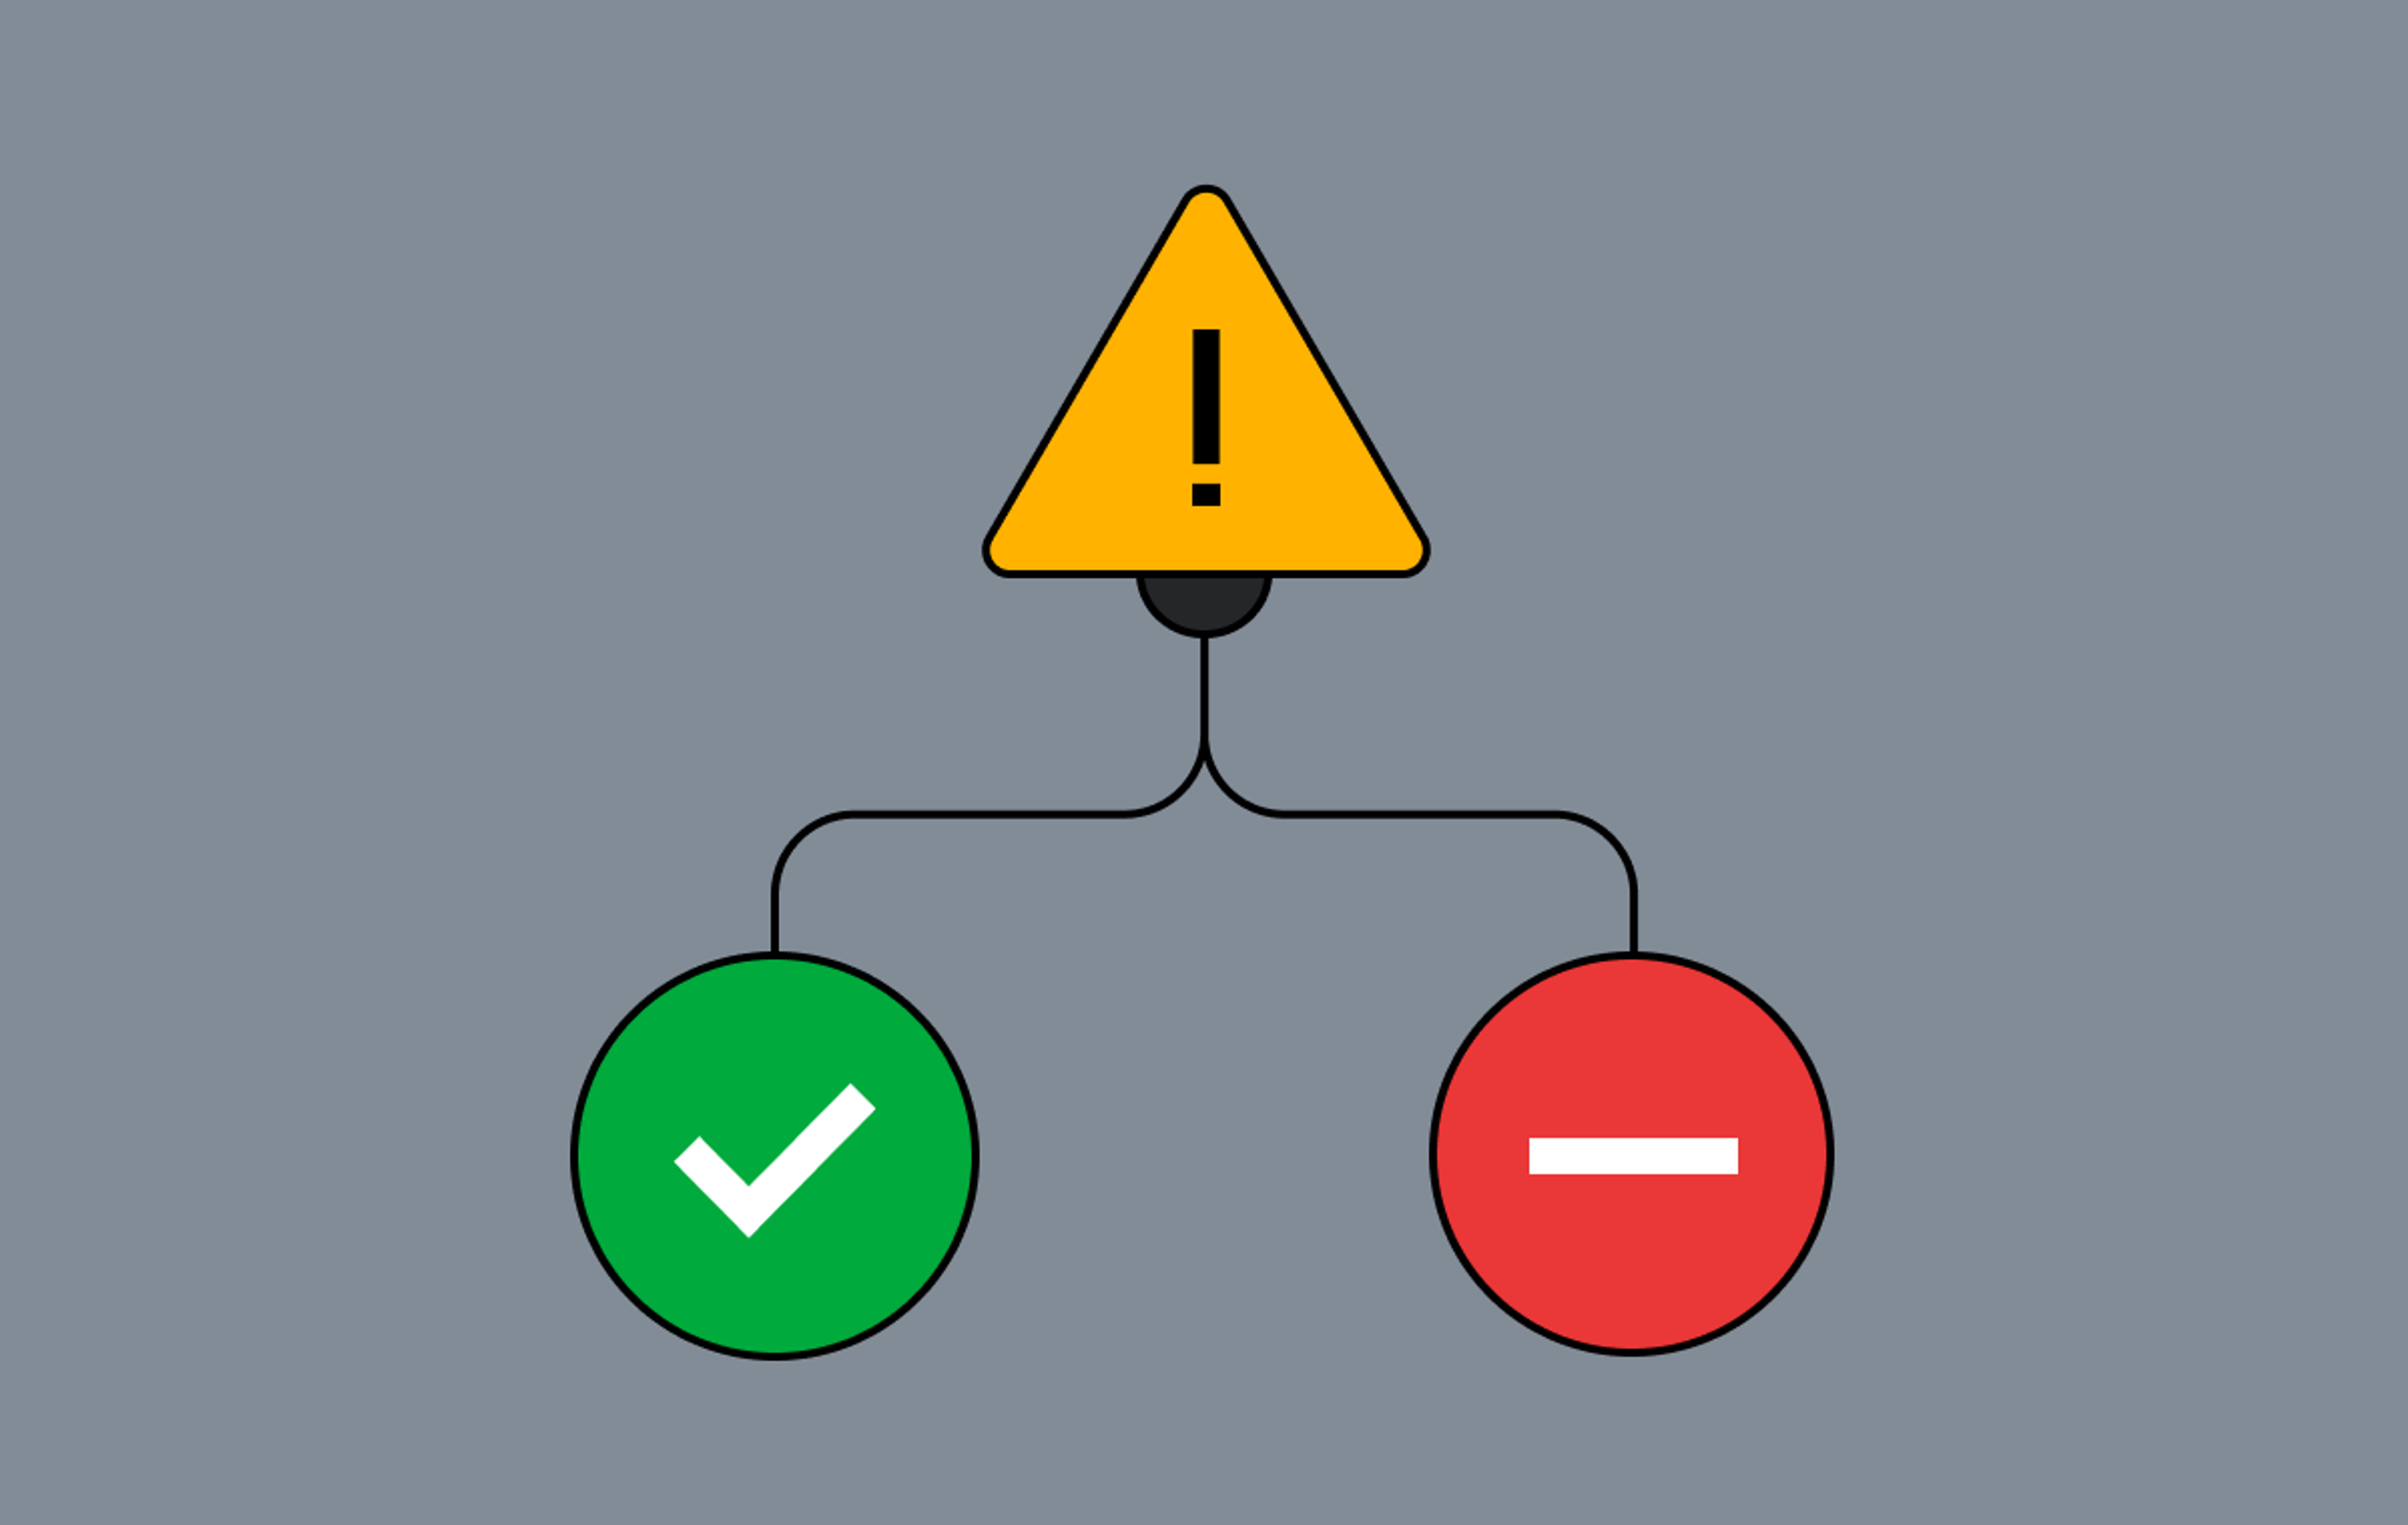 On a grey background, three symbols connected to one another. A the top of the image is a yellow triangle with an exclamation point. Connected below is a green circle with a check mark to the left and a red circle with a dash to the right. 